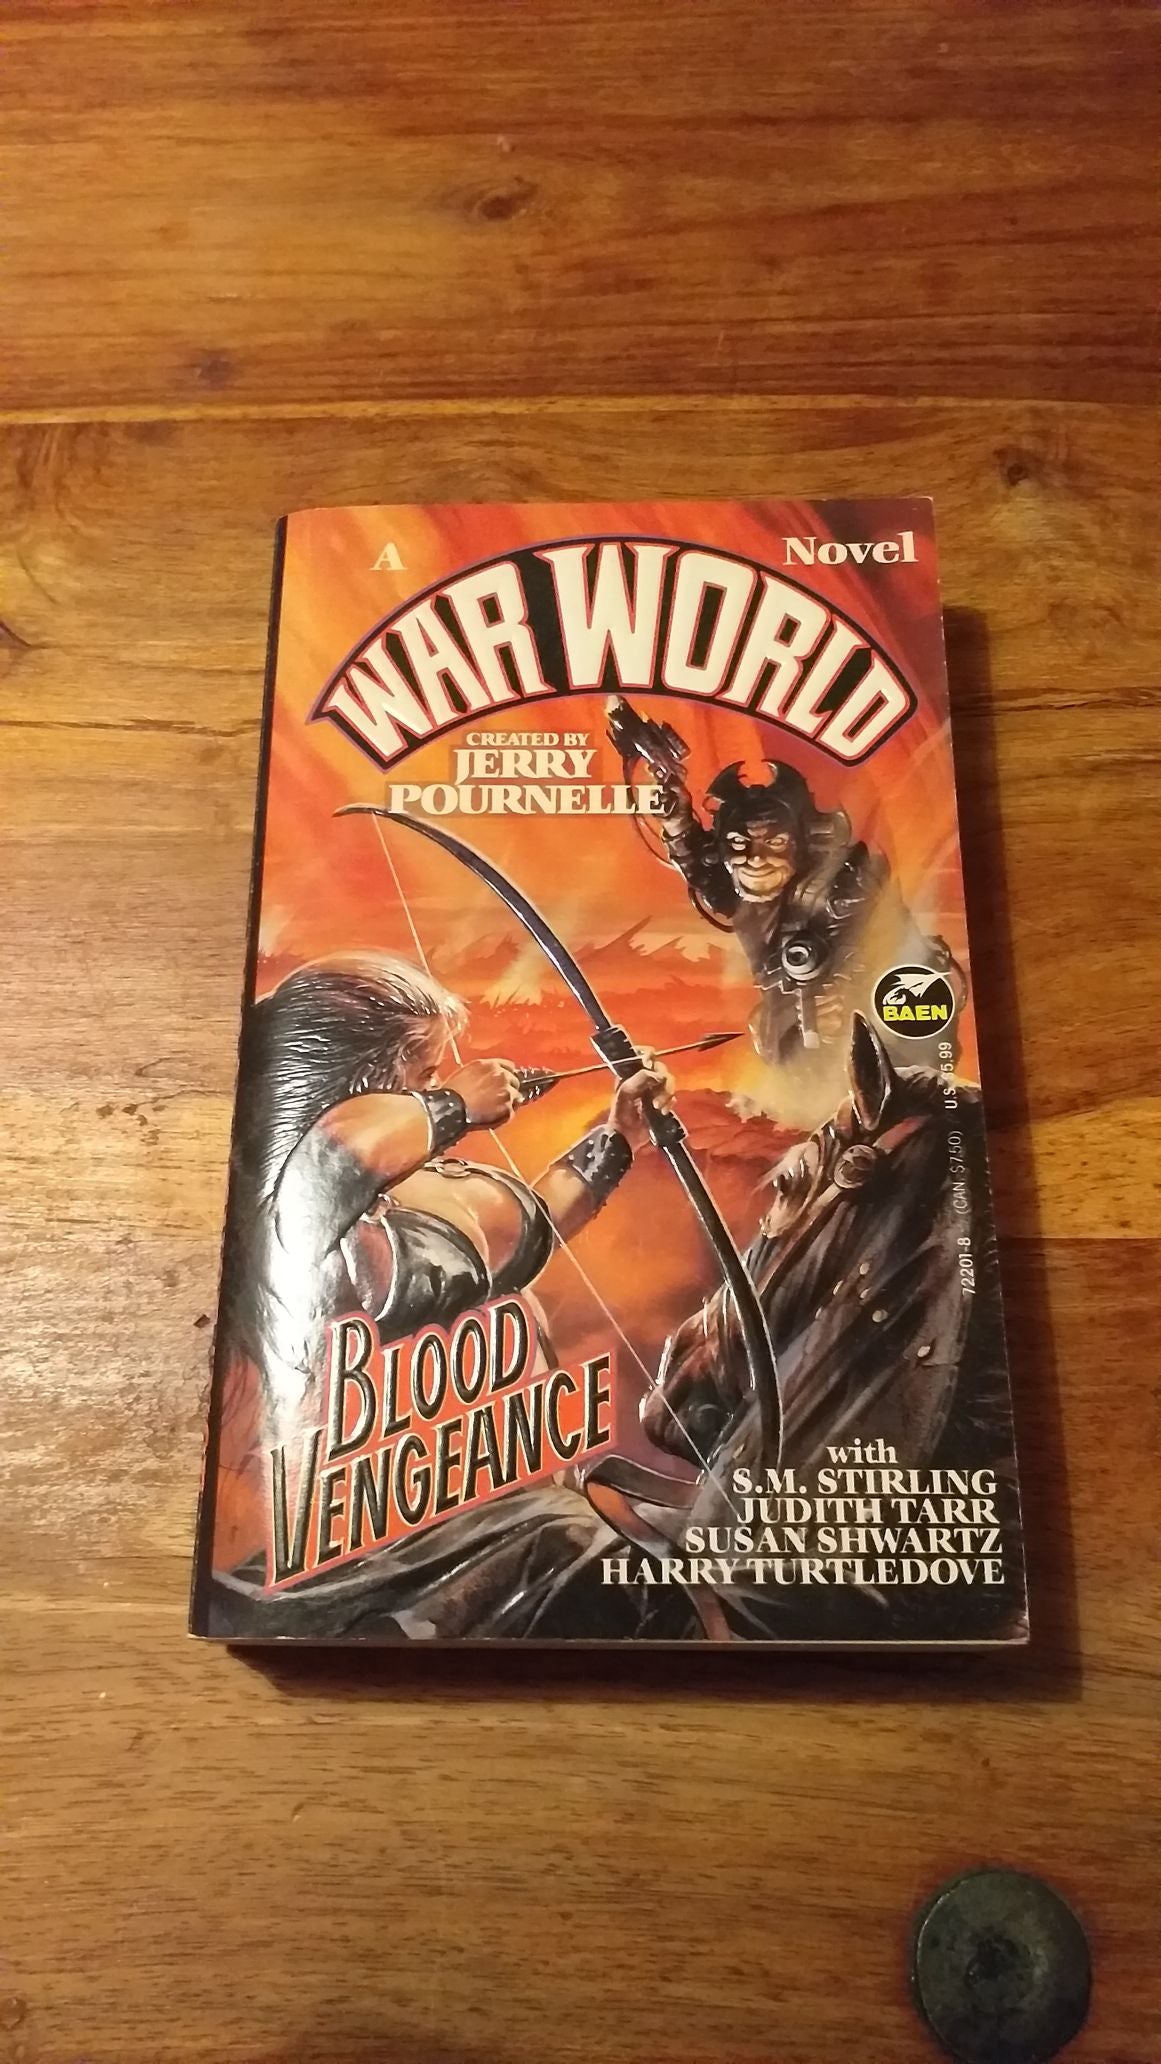 Blood Vengeance by Jerry Pournelle